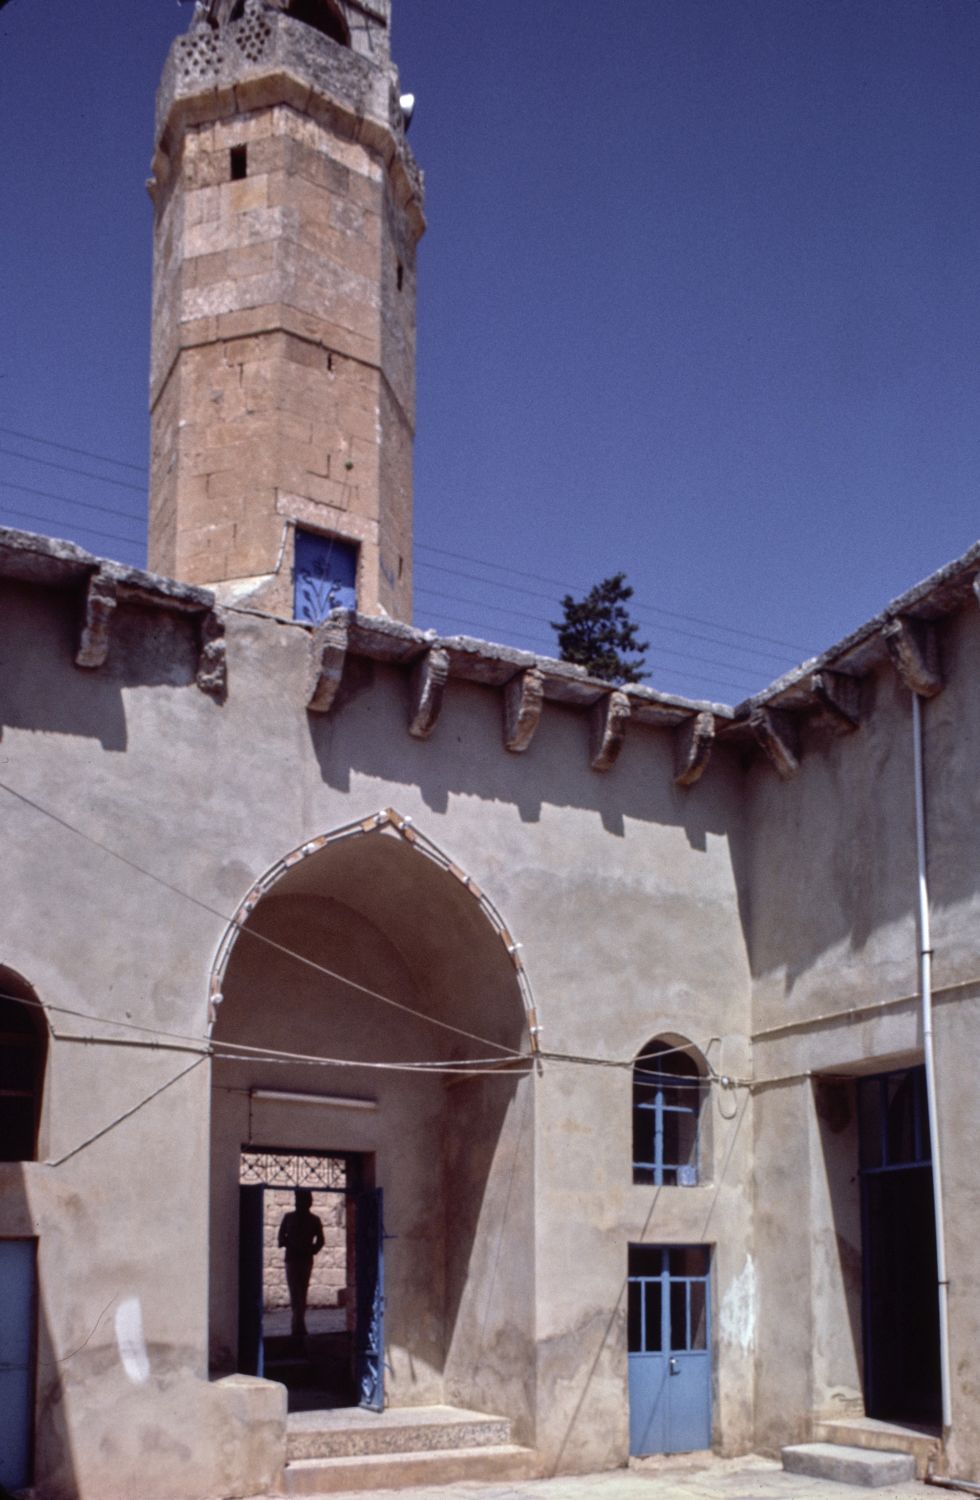 View of portal and minaret from courtyard.